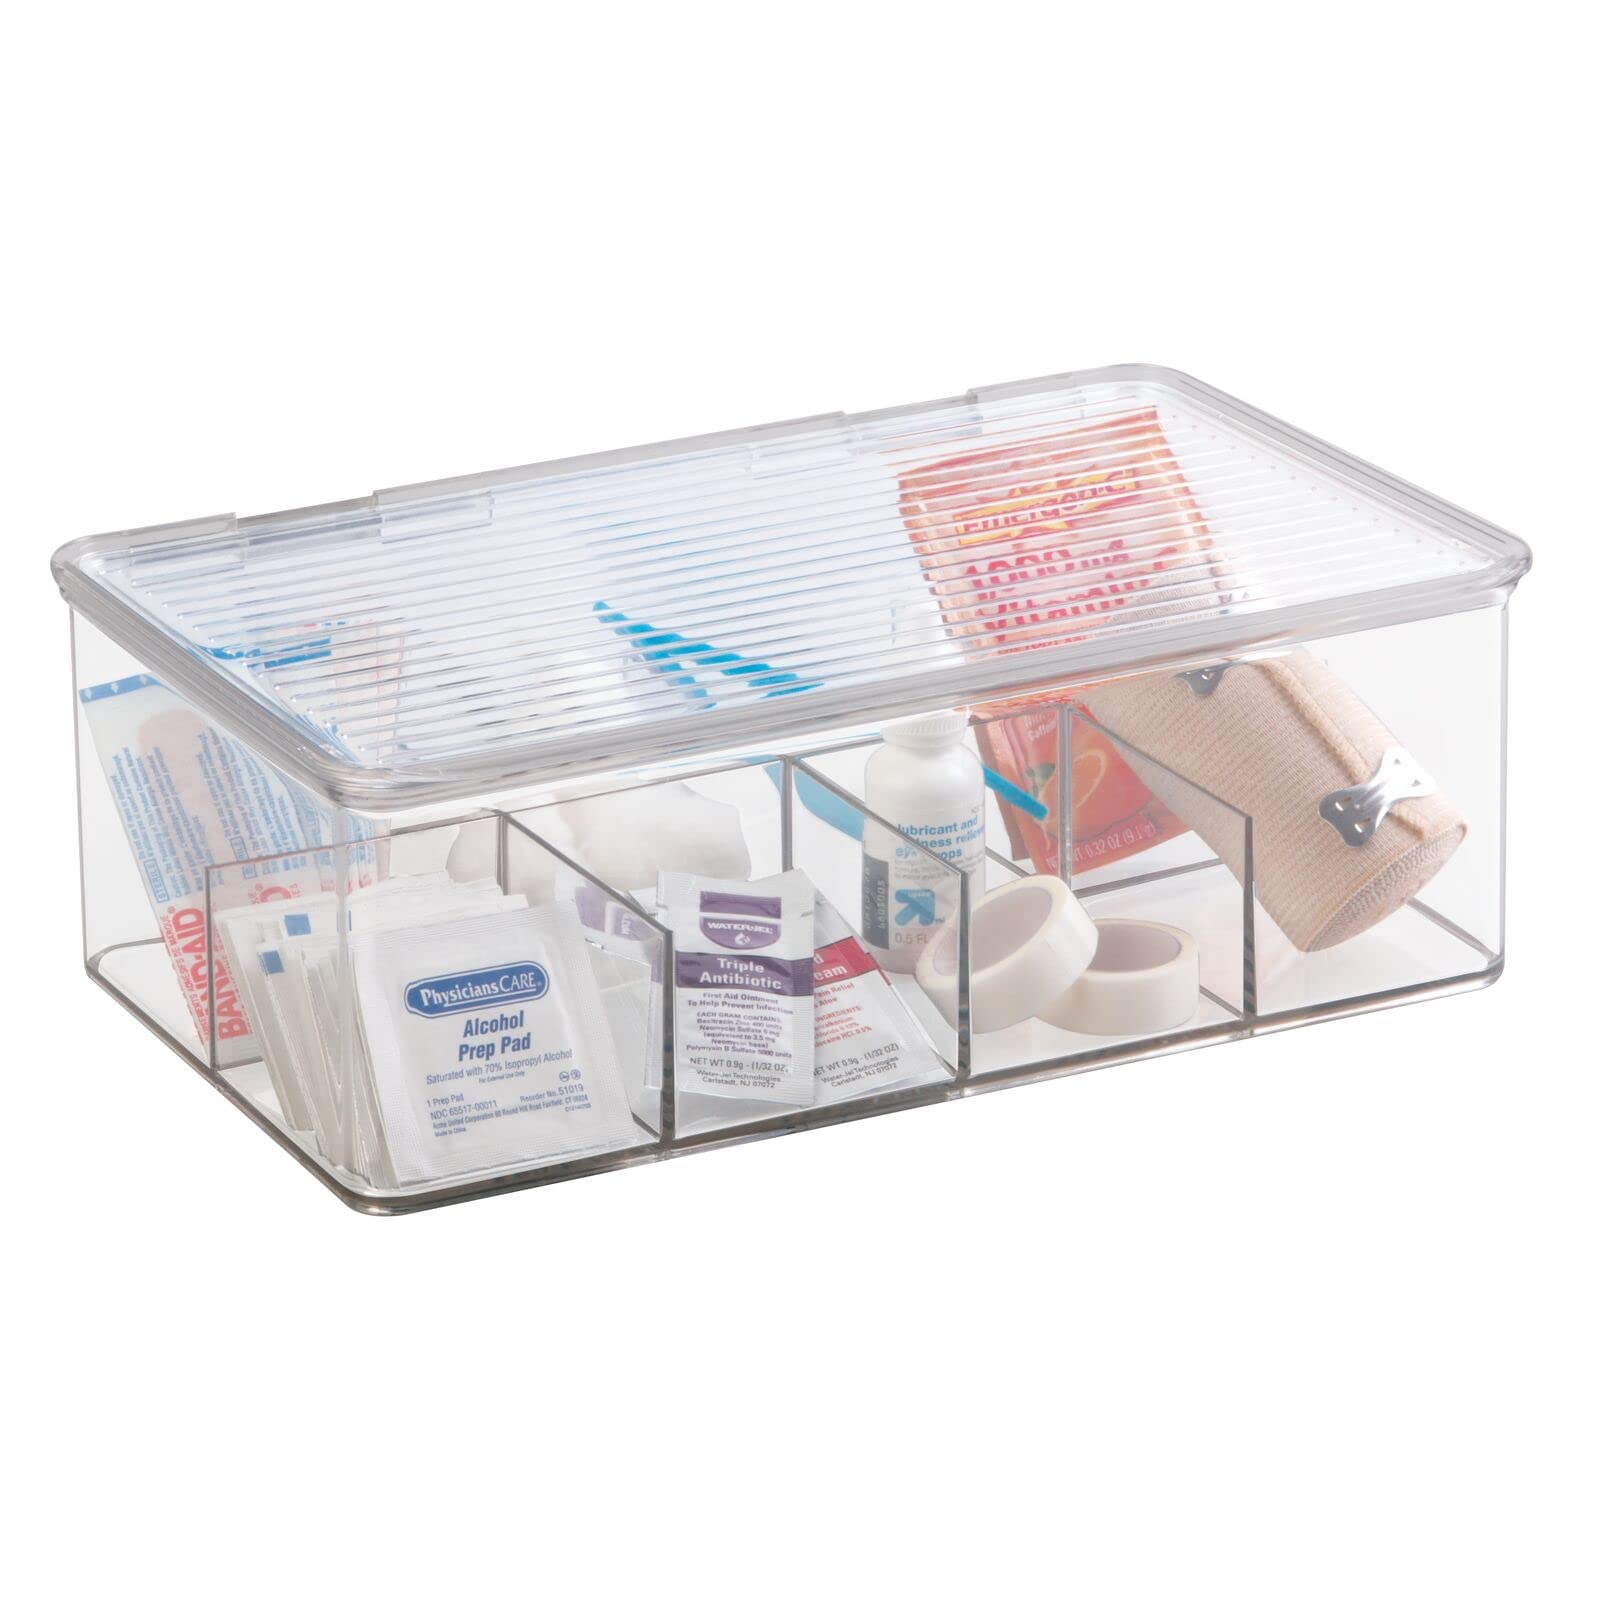 mDesign Plastic Adhesive Mount Storage Organizer Container Review